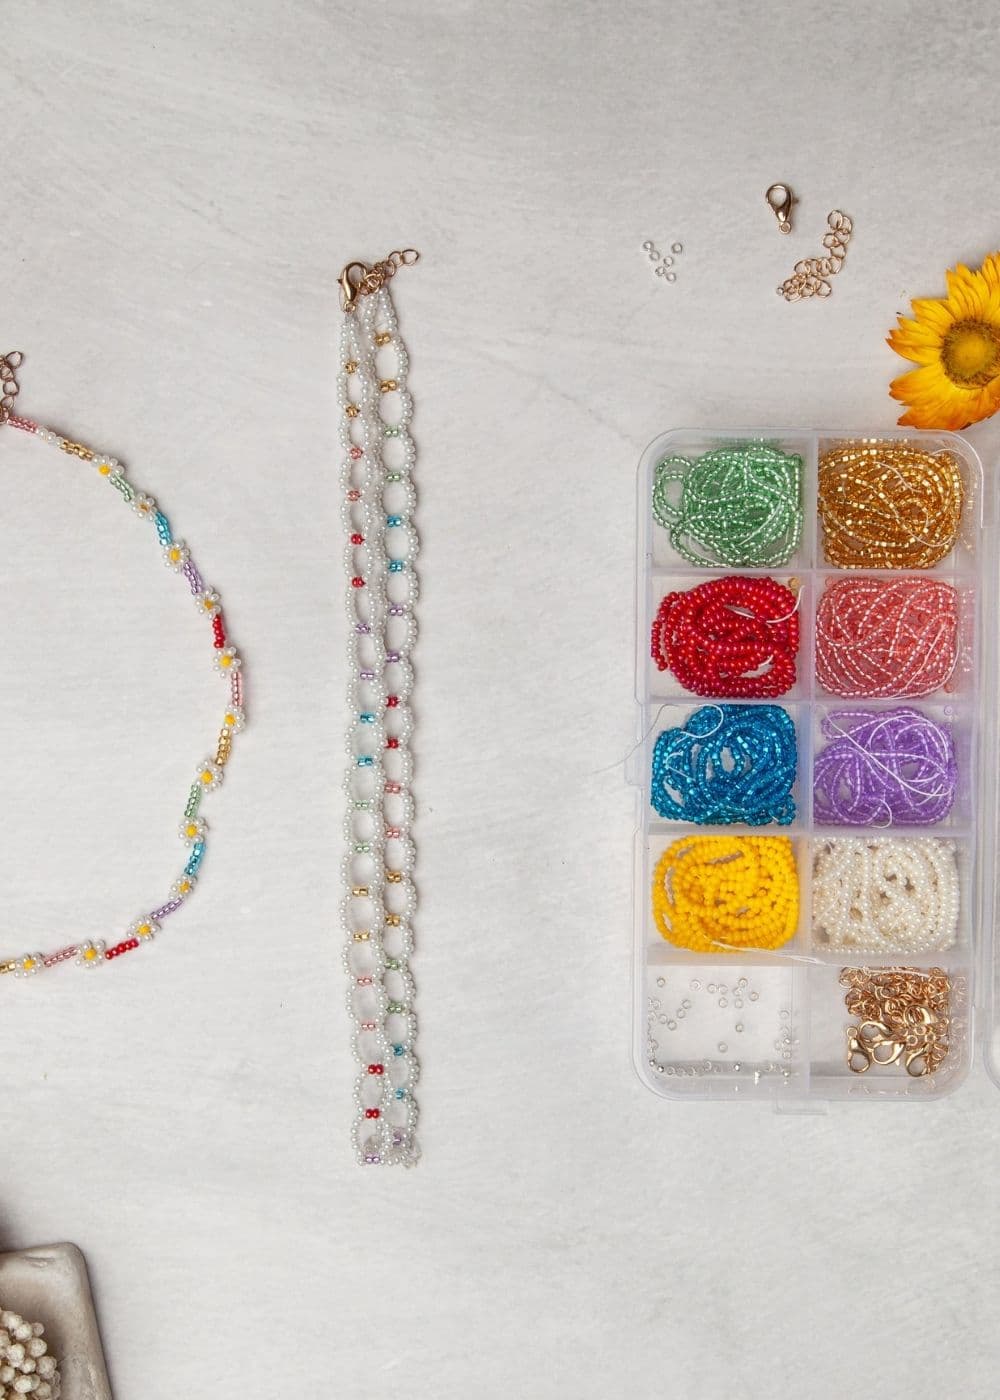 A jewelry making kit with beads and a flower.